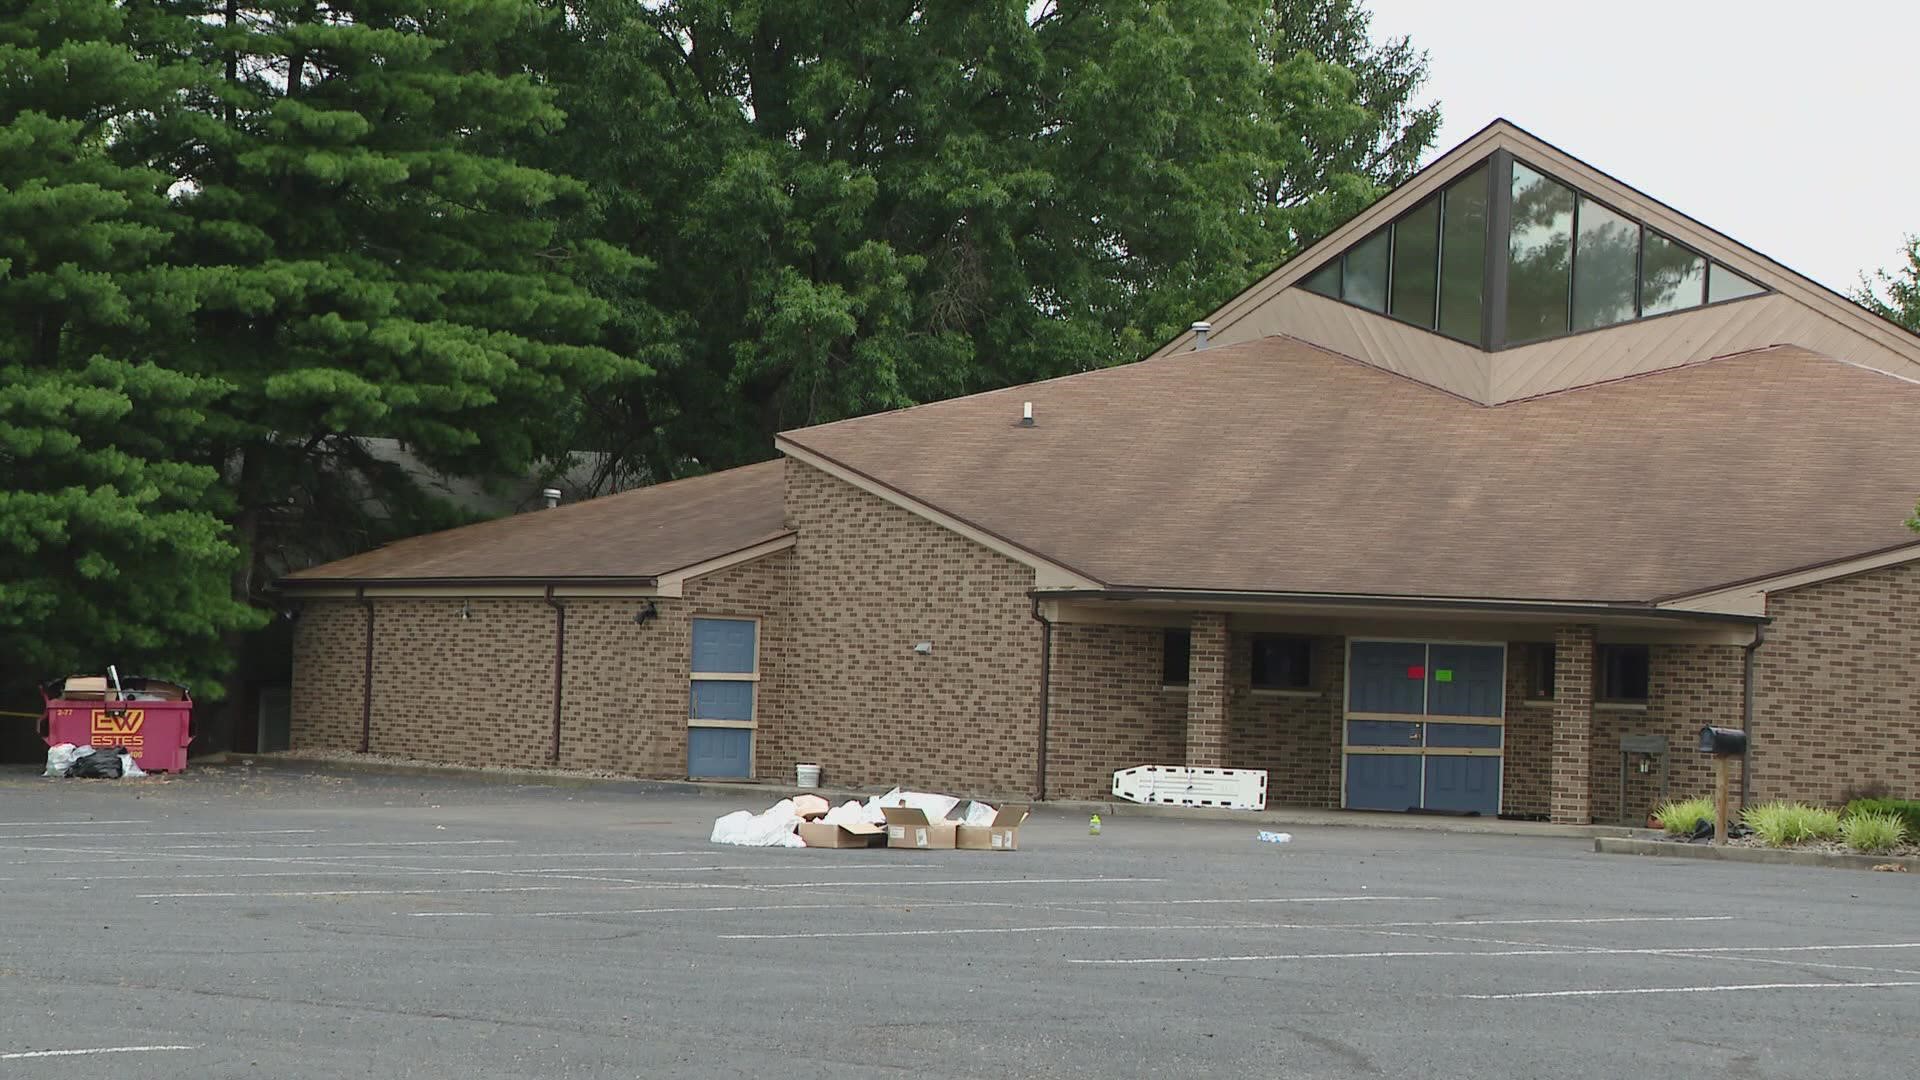 The lawsuit alleges employees at the funeral home accepted the full payment for Jennie Chiba’s death preparations and later picked up her remains.